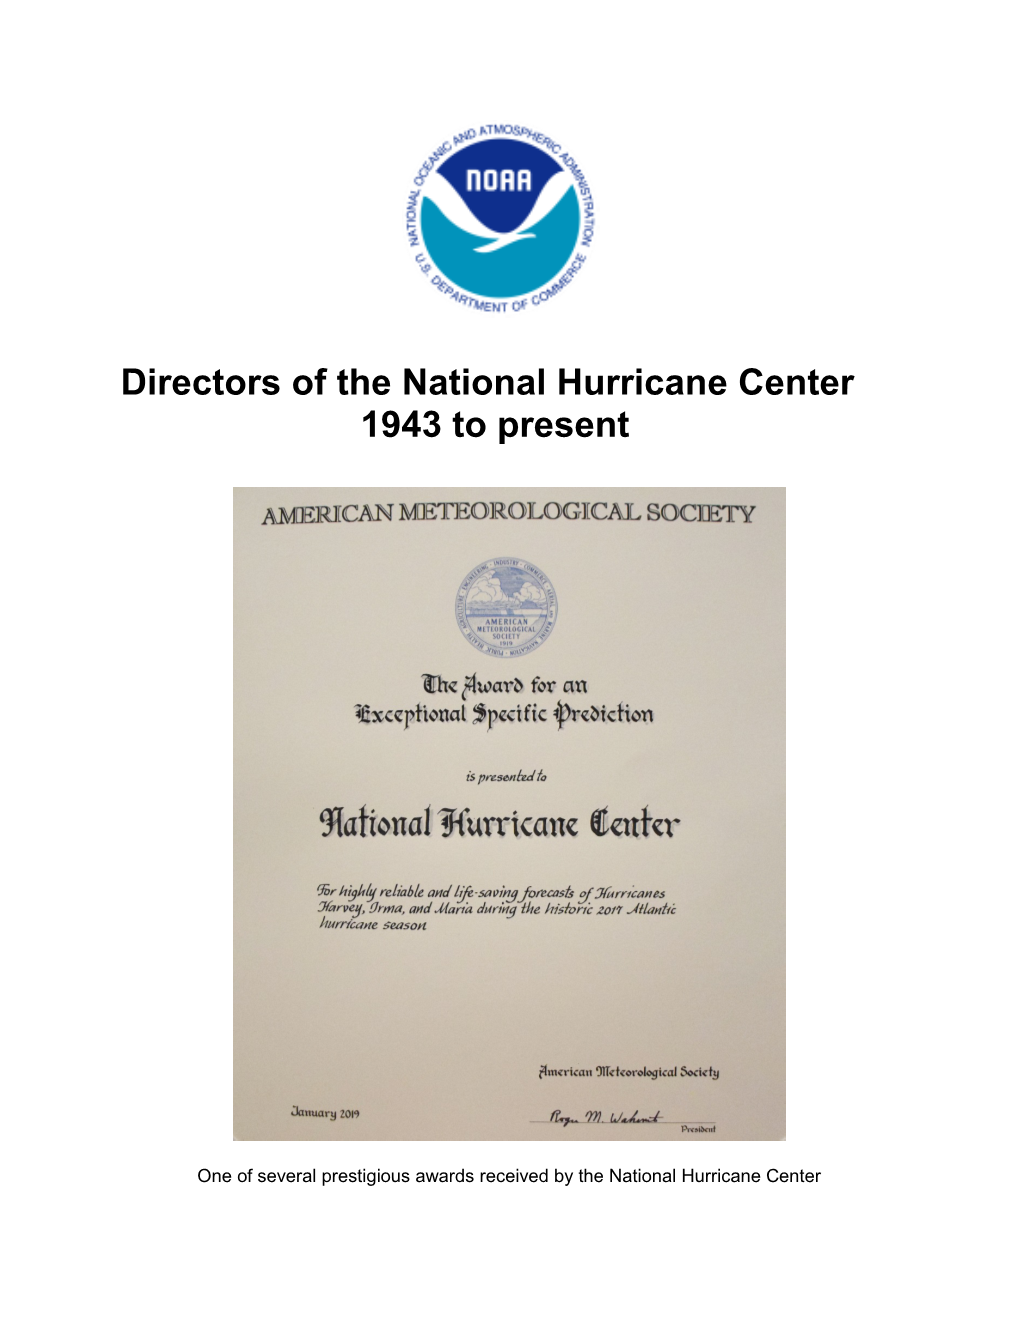 Directors of the National Hurricane Center 1943 to Present